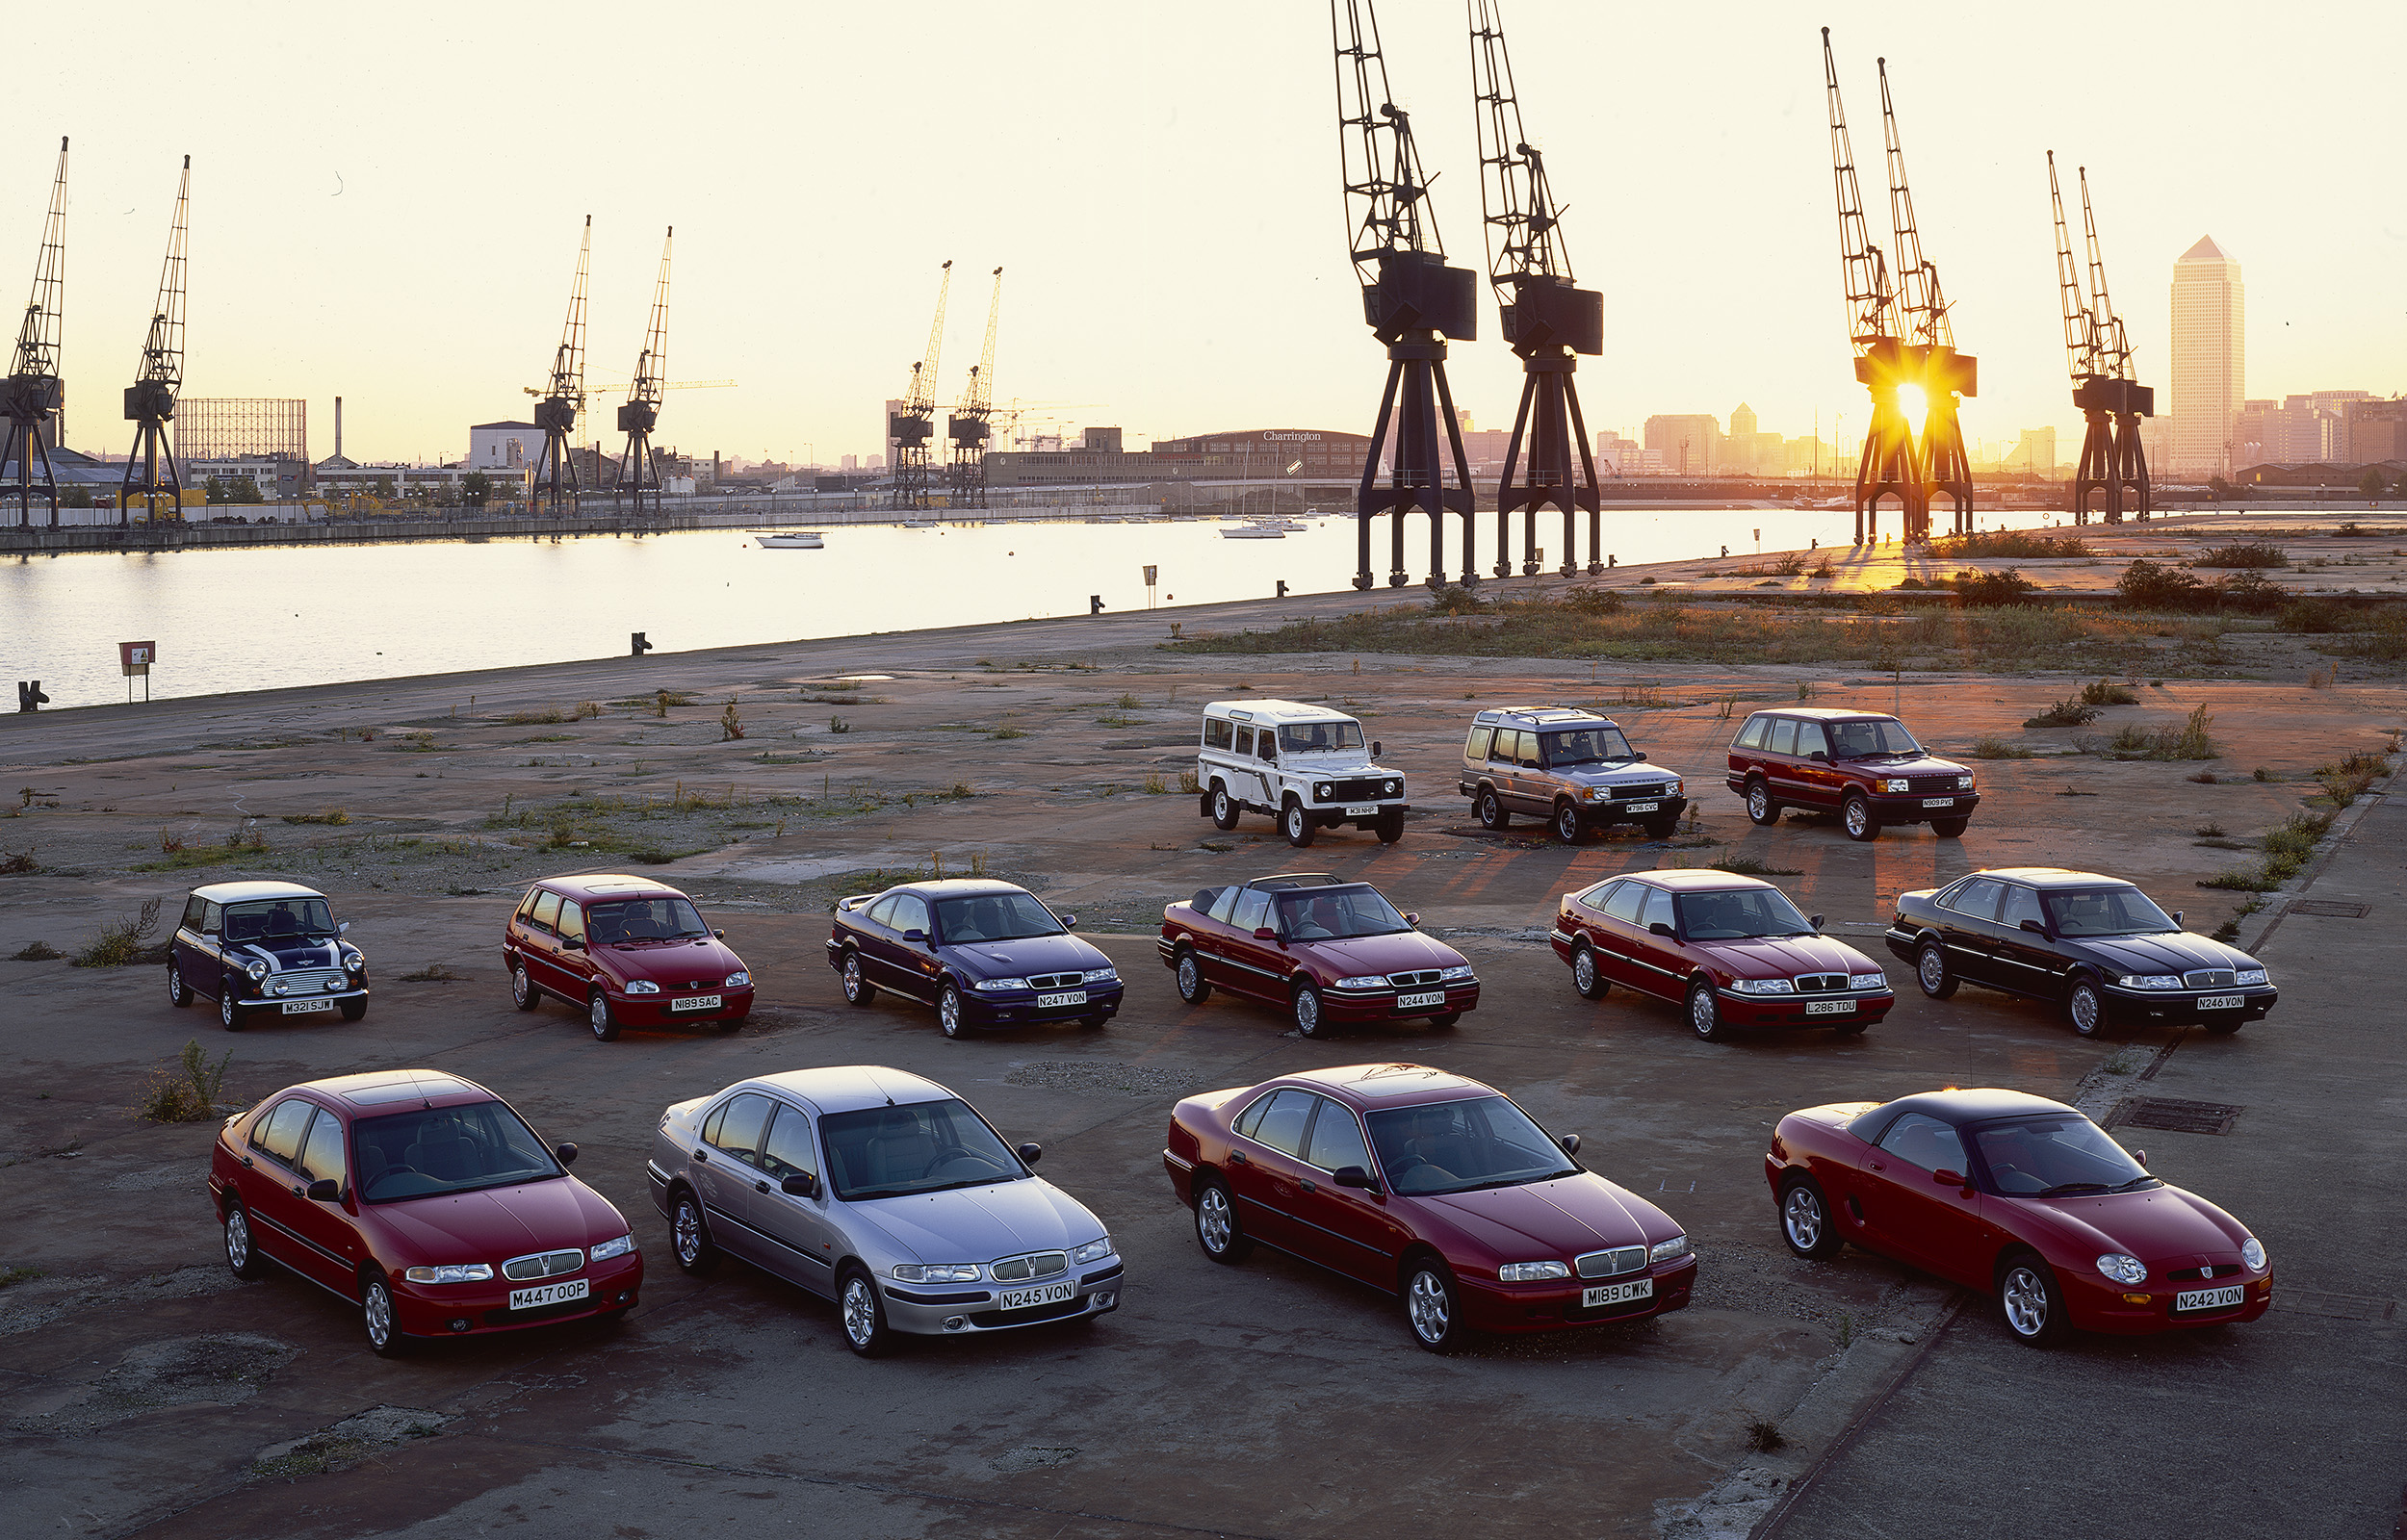  Rover Cars at the Royal Victoria Docks London  BMW Annual Report 1995 